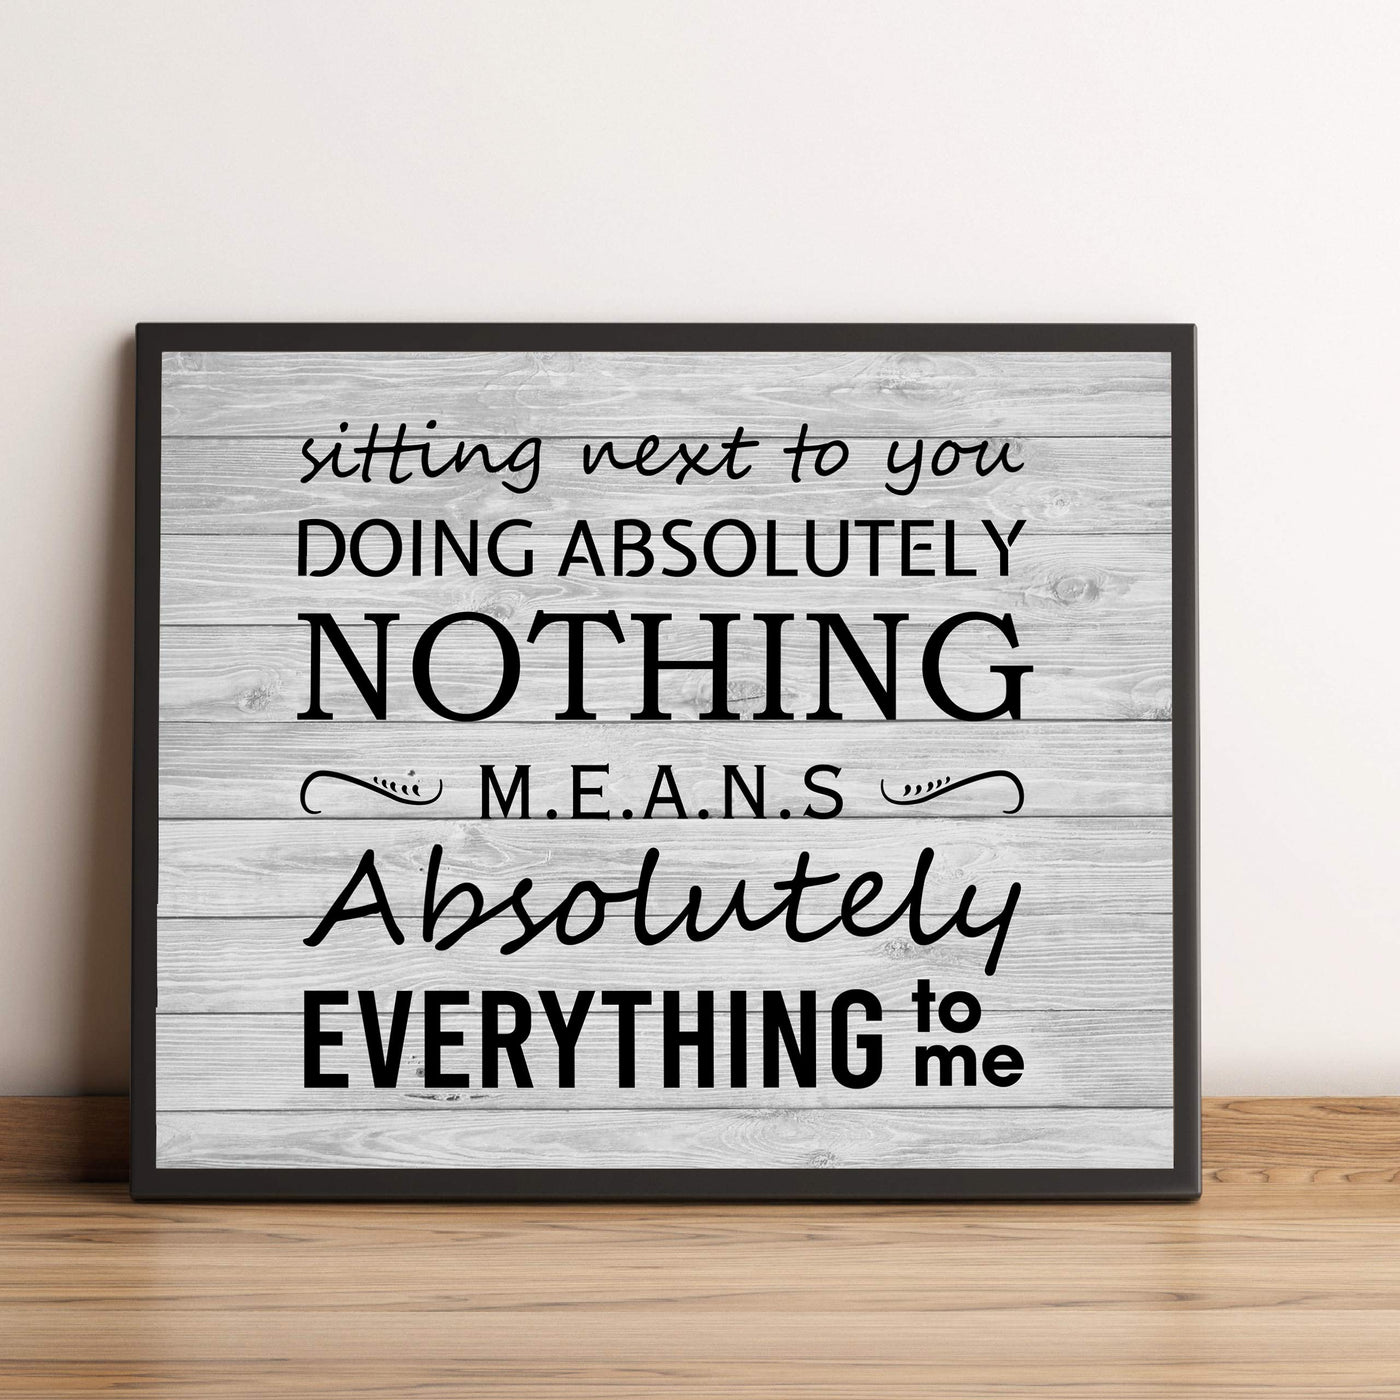 Sitting Next To You Doing Nothing Means Everything Love Quotes Wall Art Decor -10 x 8" Inspirational Love & Marriage Print -Ready to Frame. Great Romantic Gift! Printed on Paper-Not Wood.